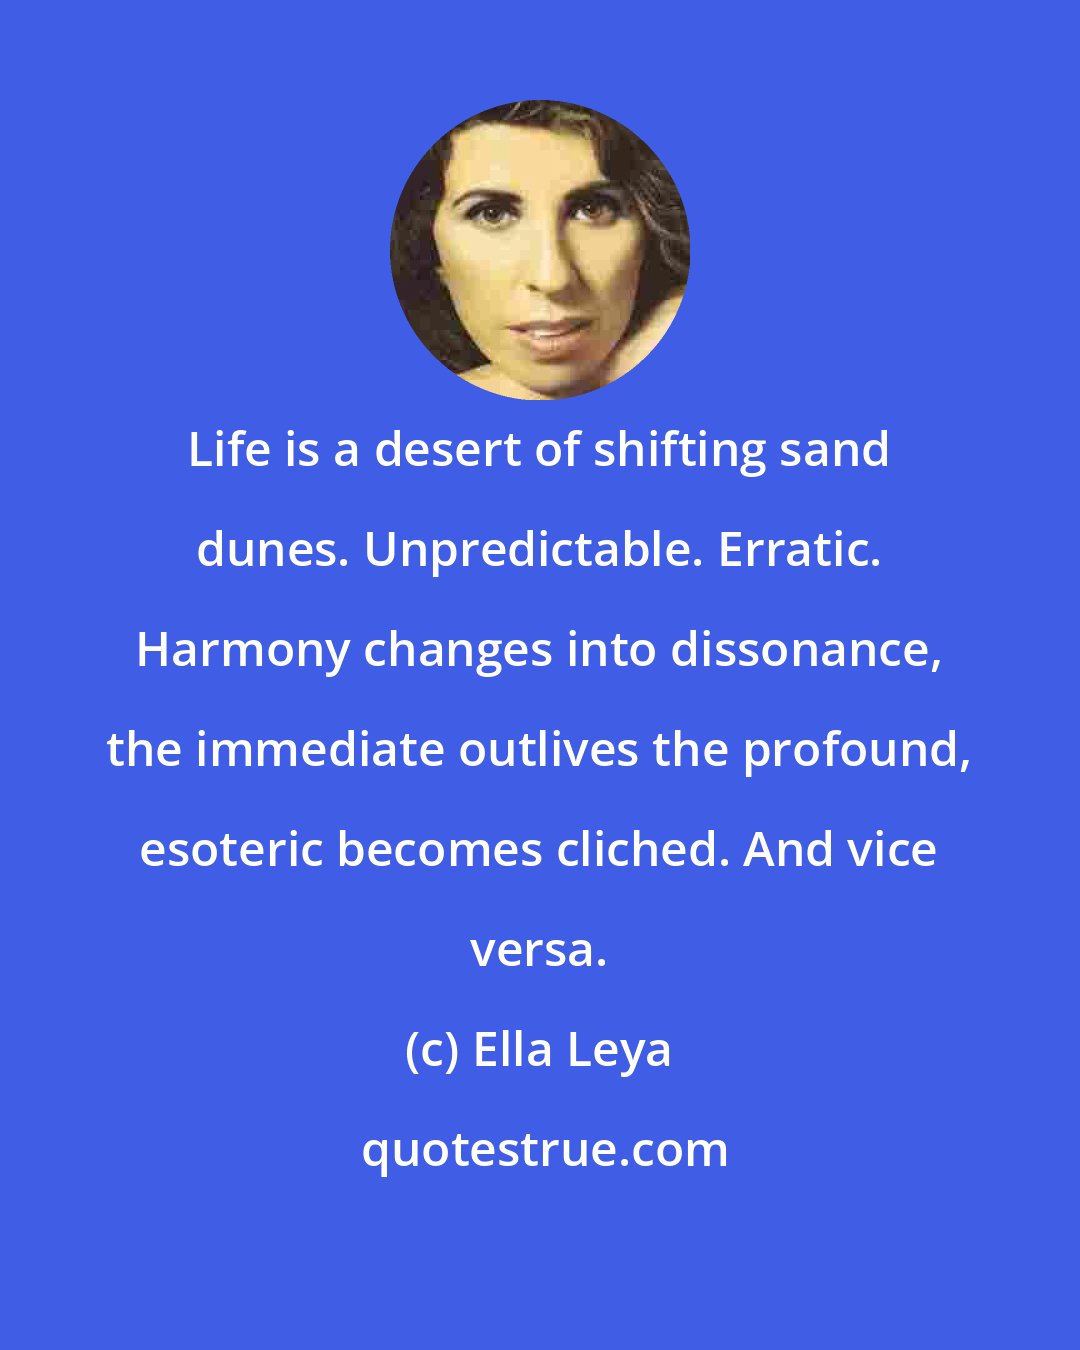 Ella Leya: Life is a desert of shifting sand dunes. Unpredictable. Erratic. Harmony changes into dissonance, the immediate outlives the profound, esoteric becomes cliched. And vice versa.